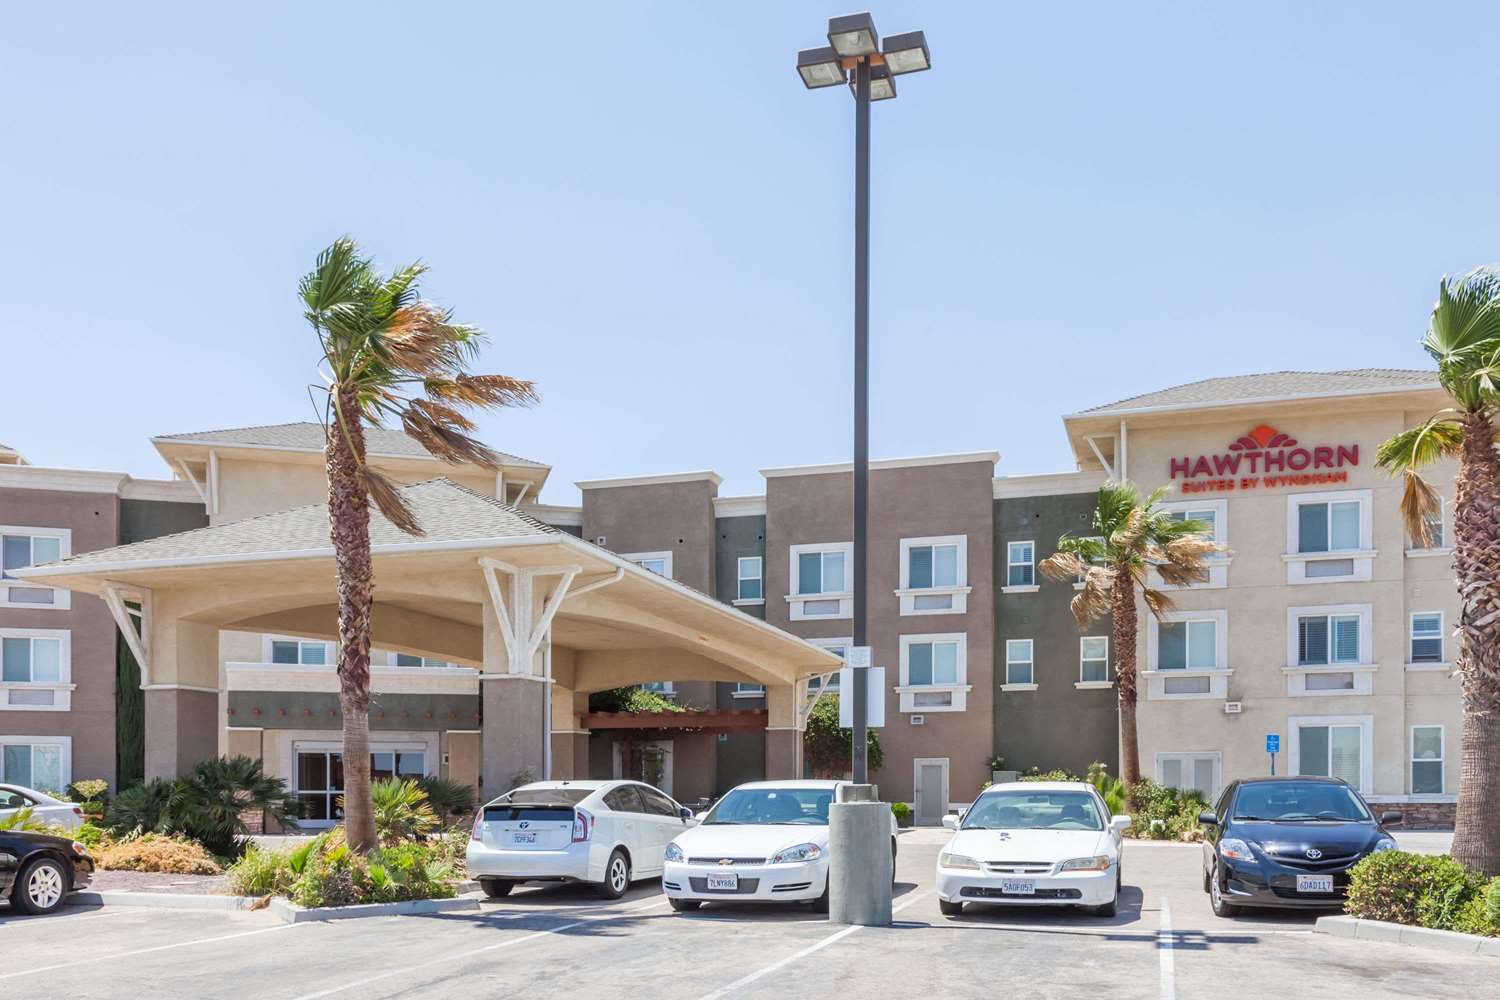 Pet Friendly Hawthorn Suites by Wyndham Victorville in Victorville, California